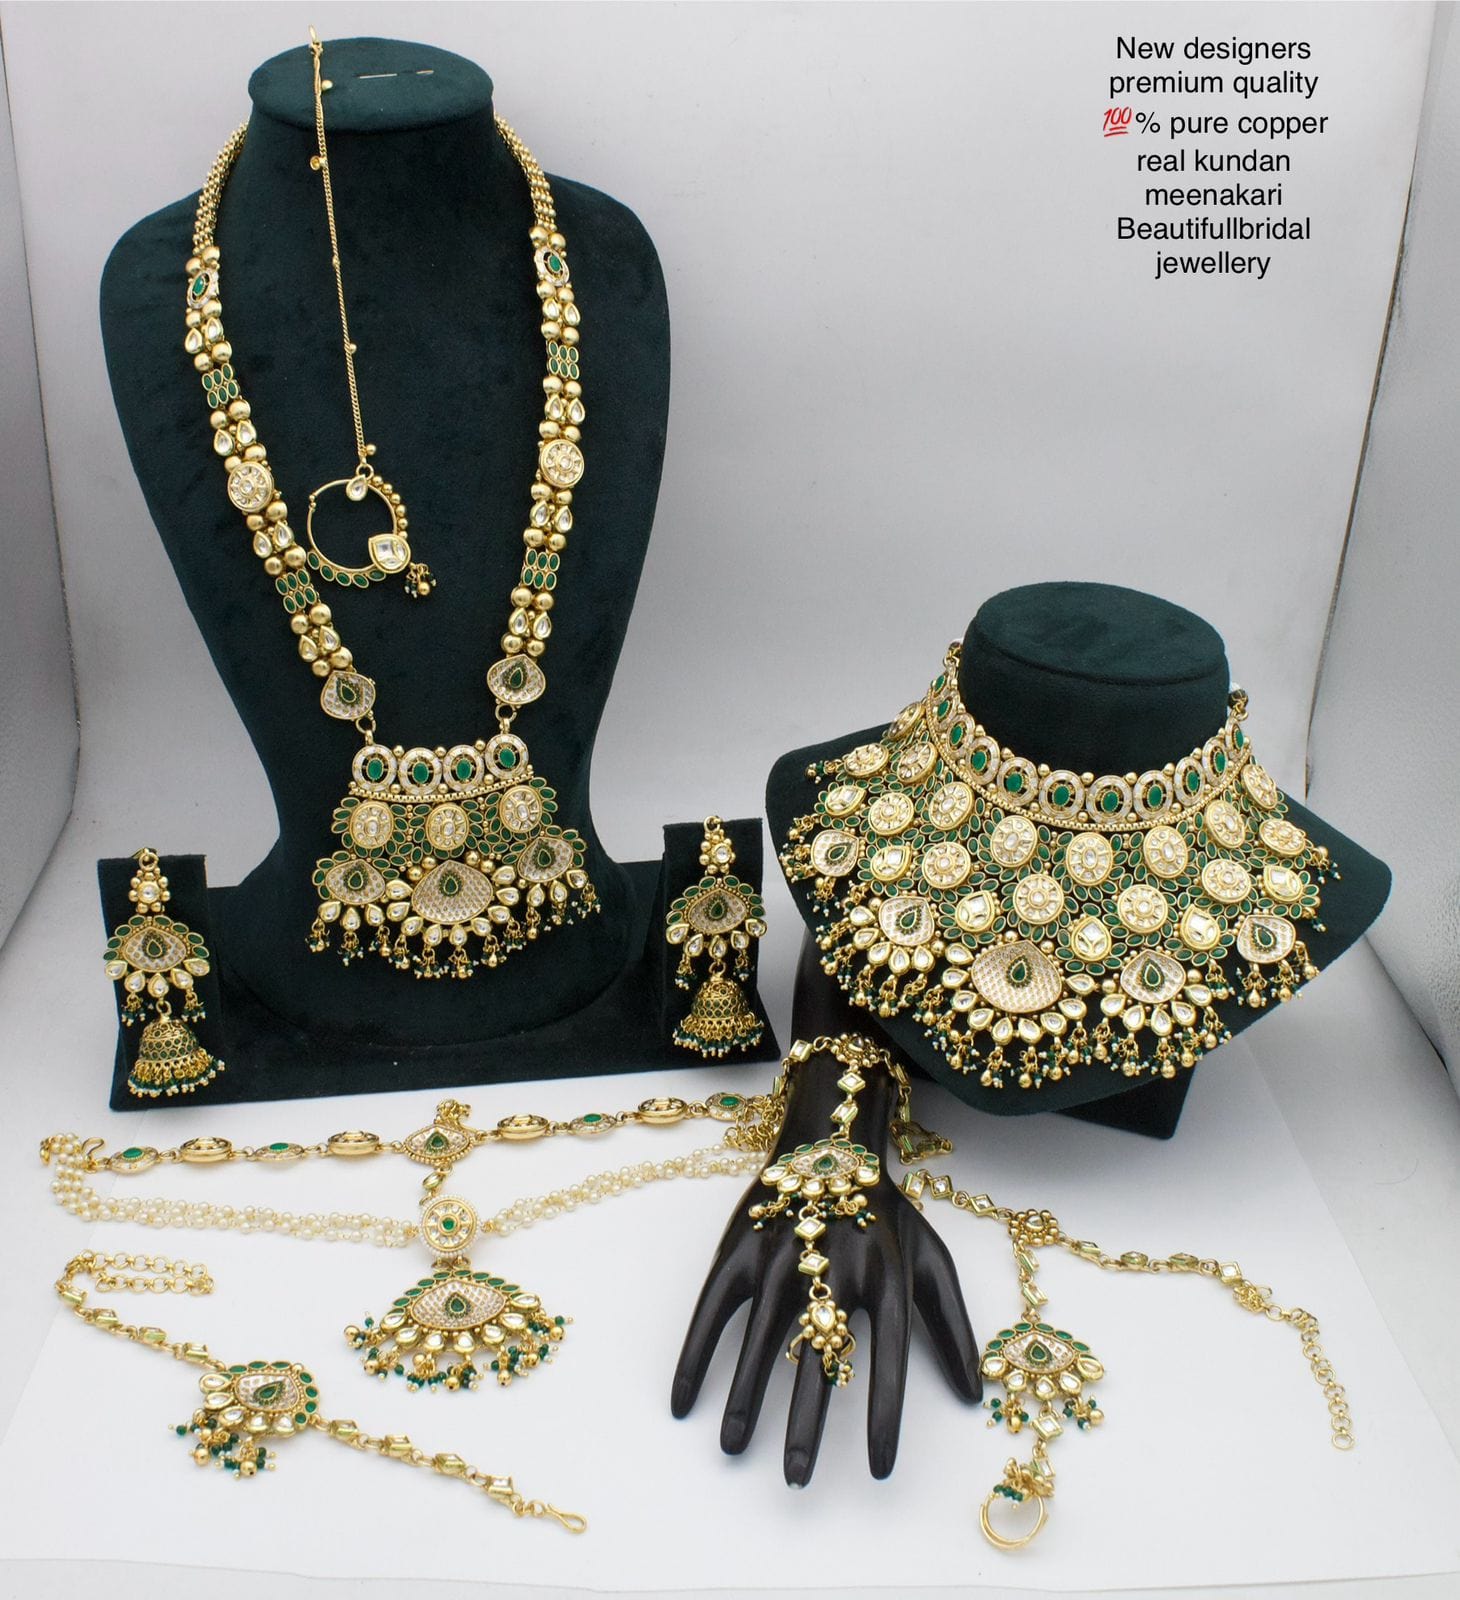 LV Bridal jewelry Exquisite Green Copper Bridal Jewelry Set with Elegant Accessories